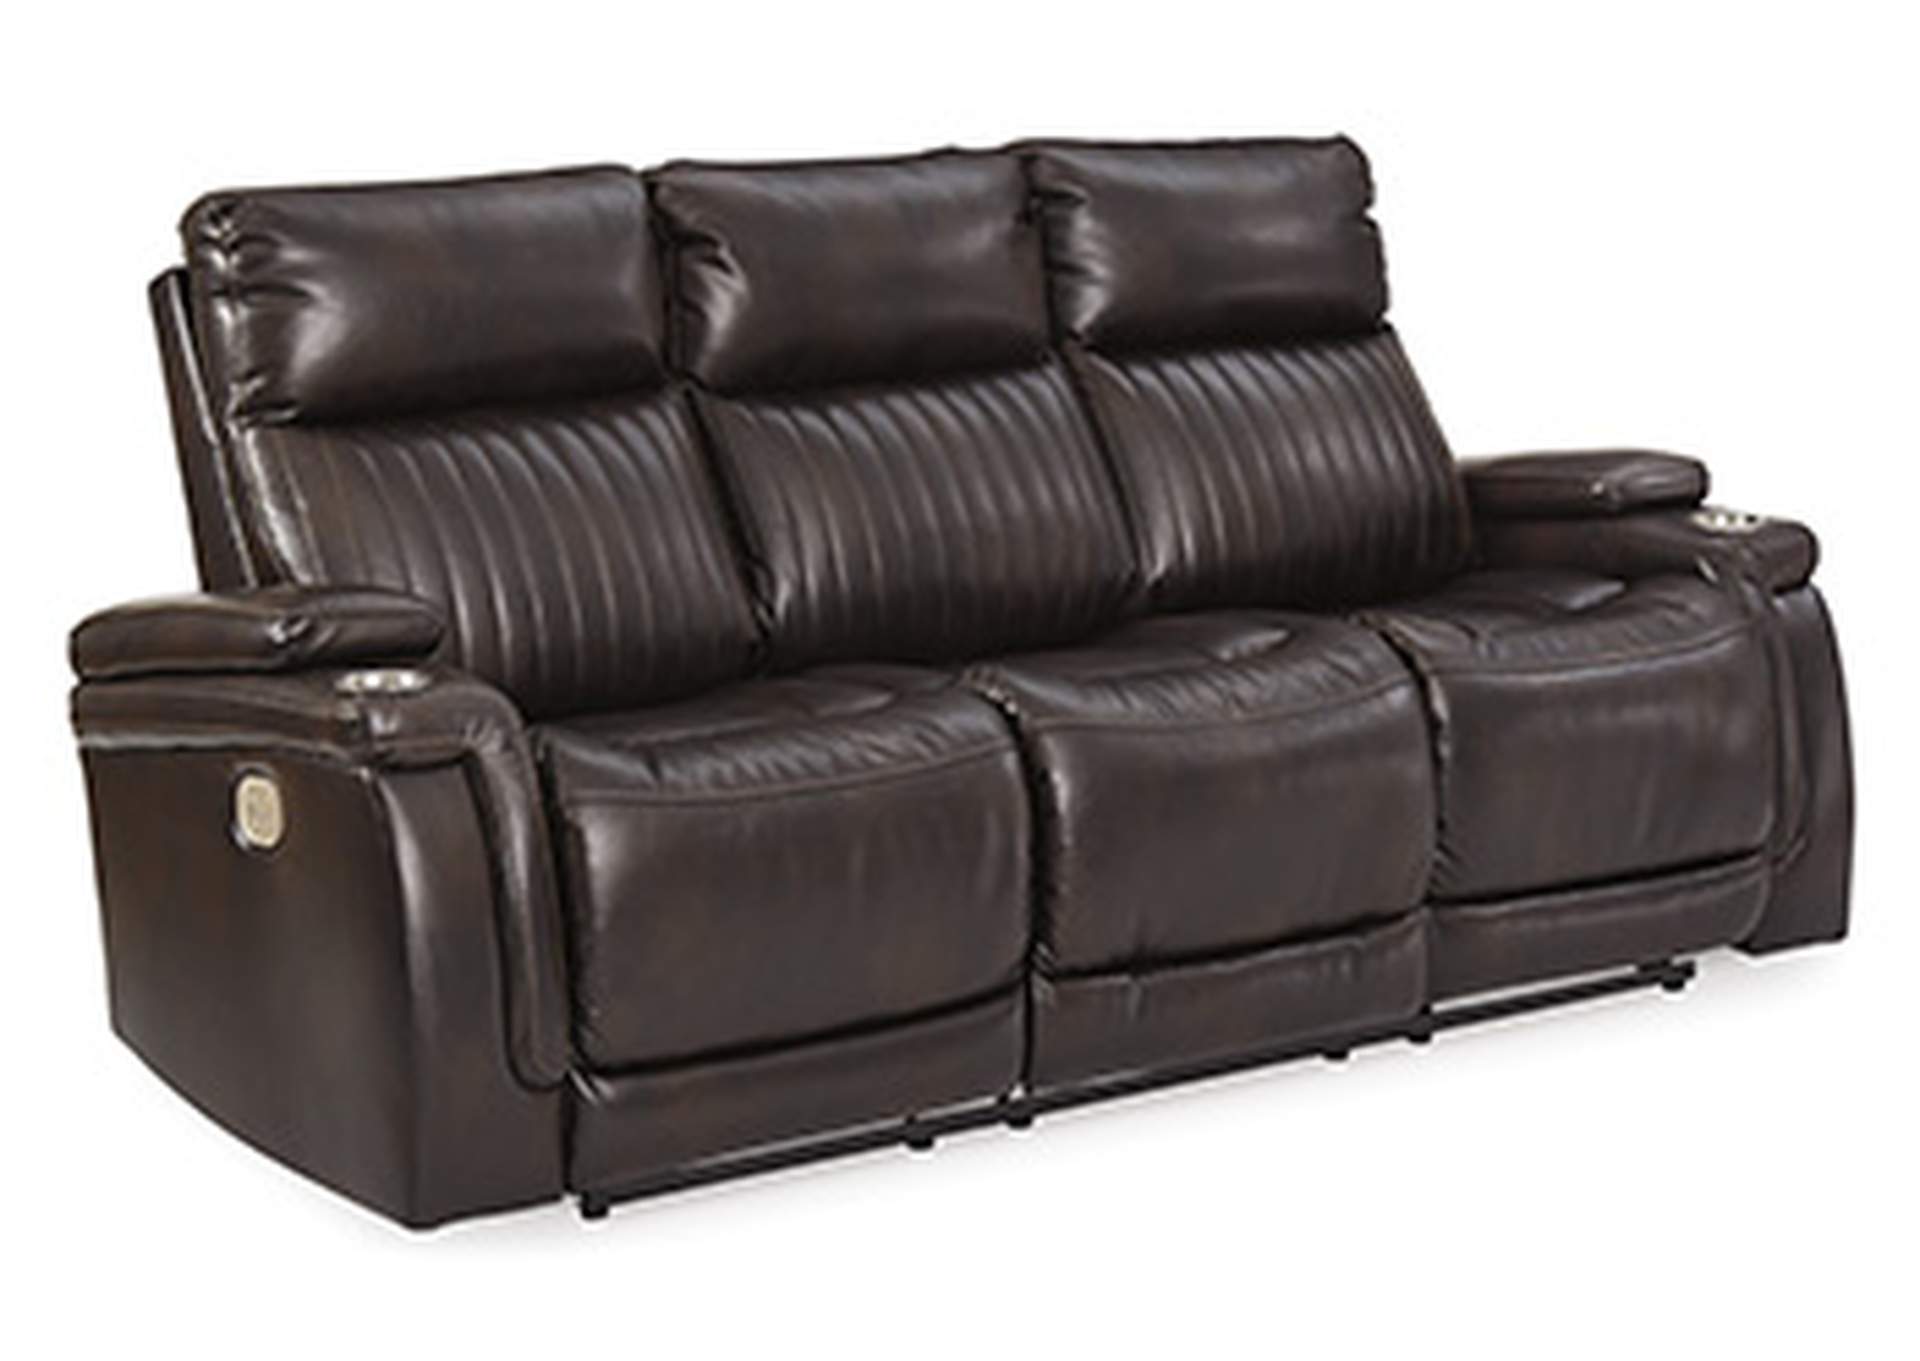 Team Time Power Reclining Sofa,Signature Design By Ashley